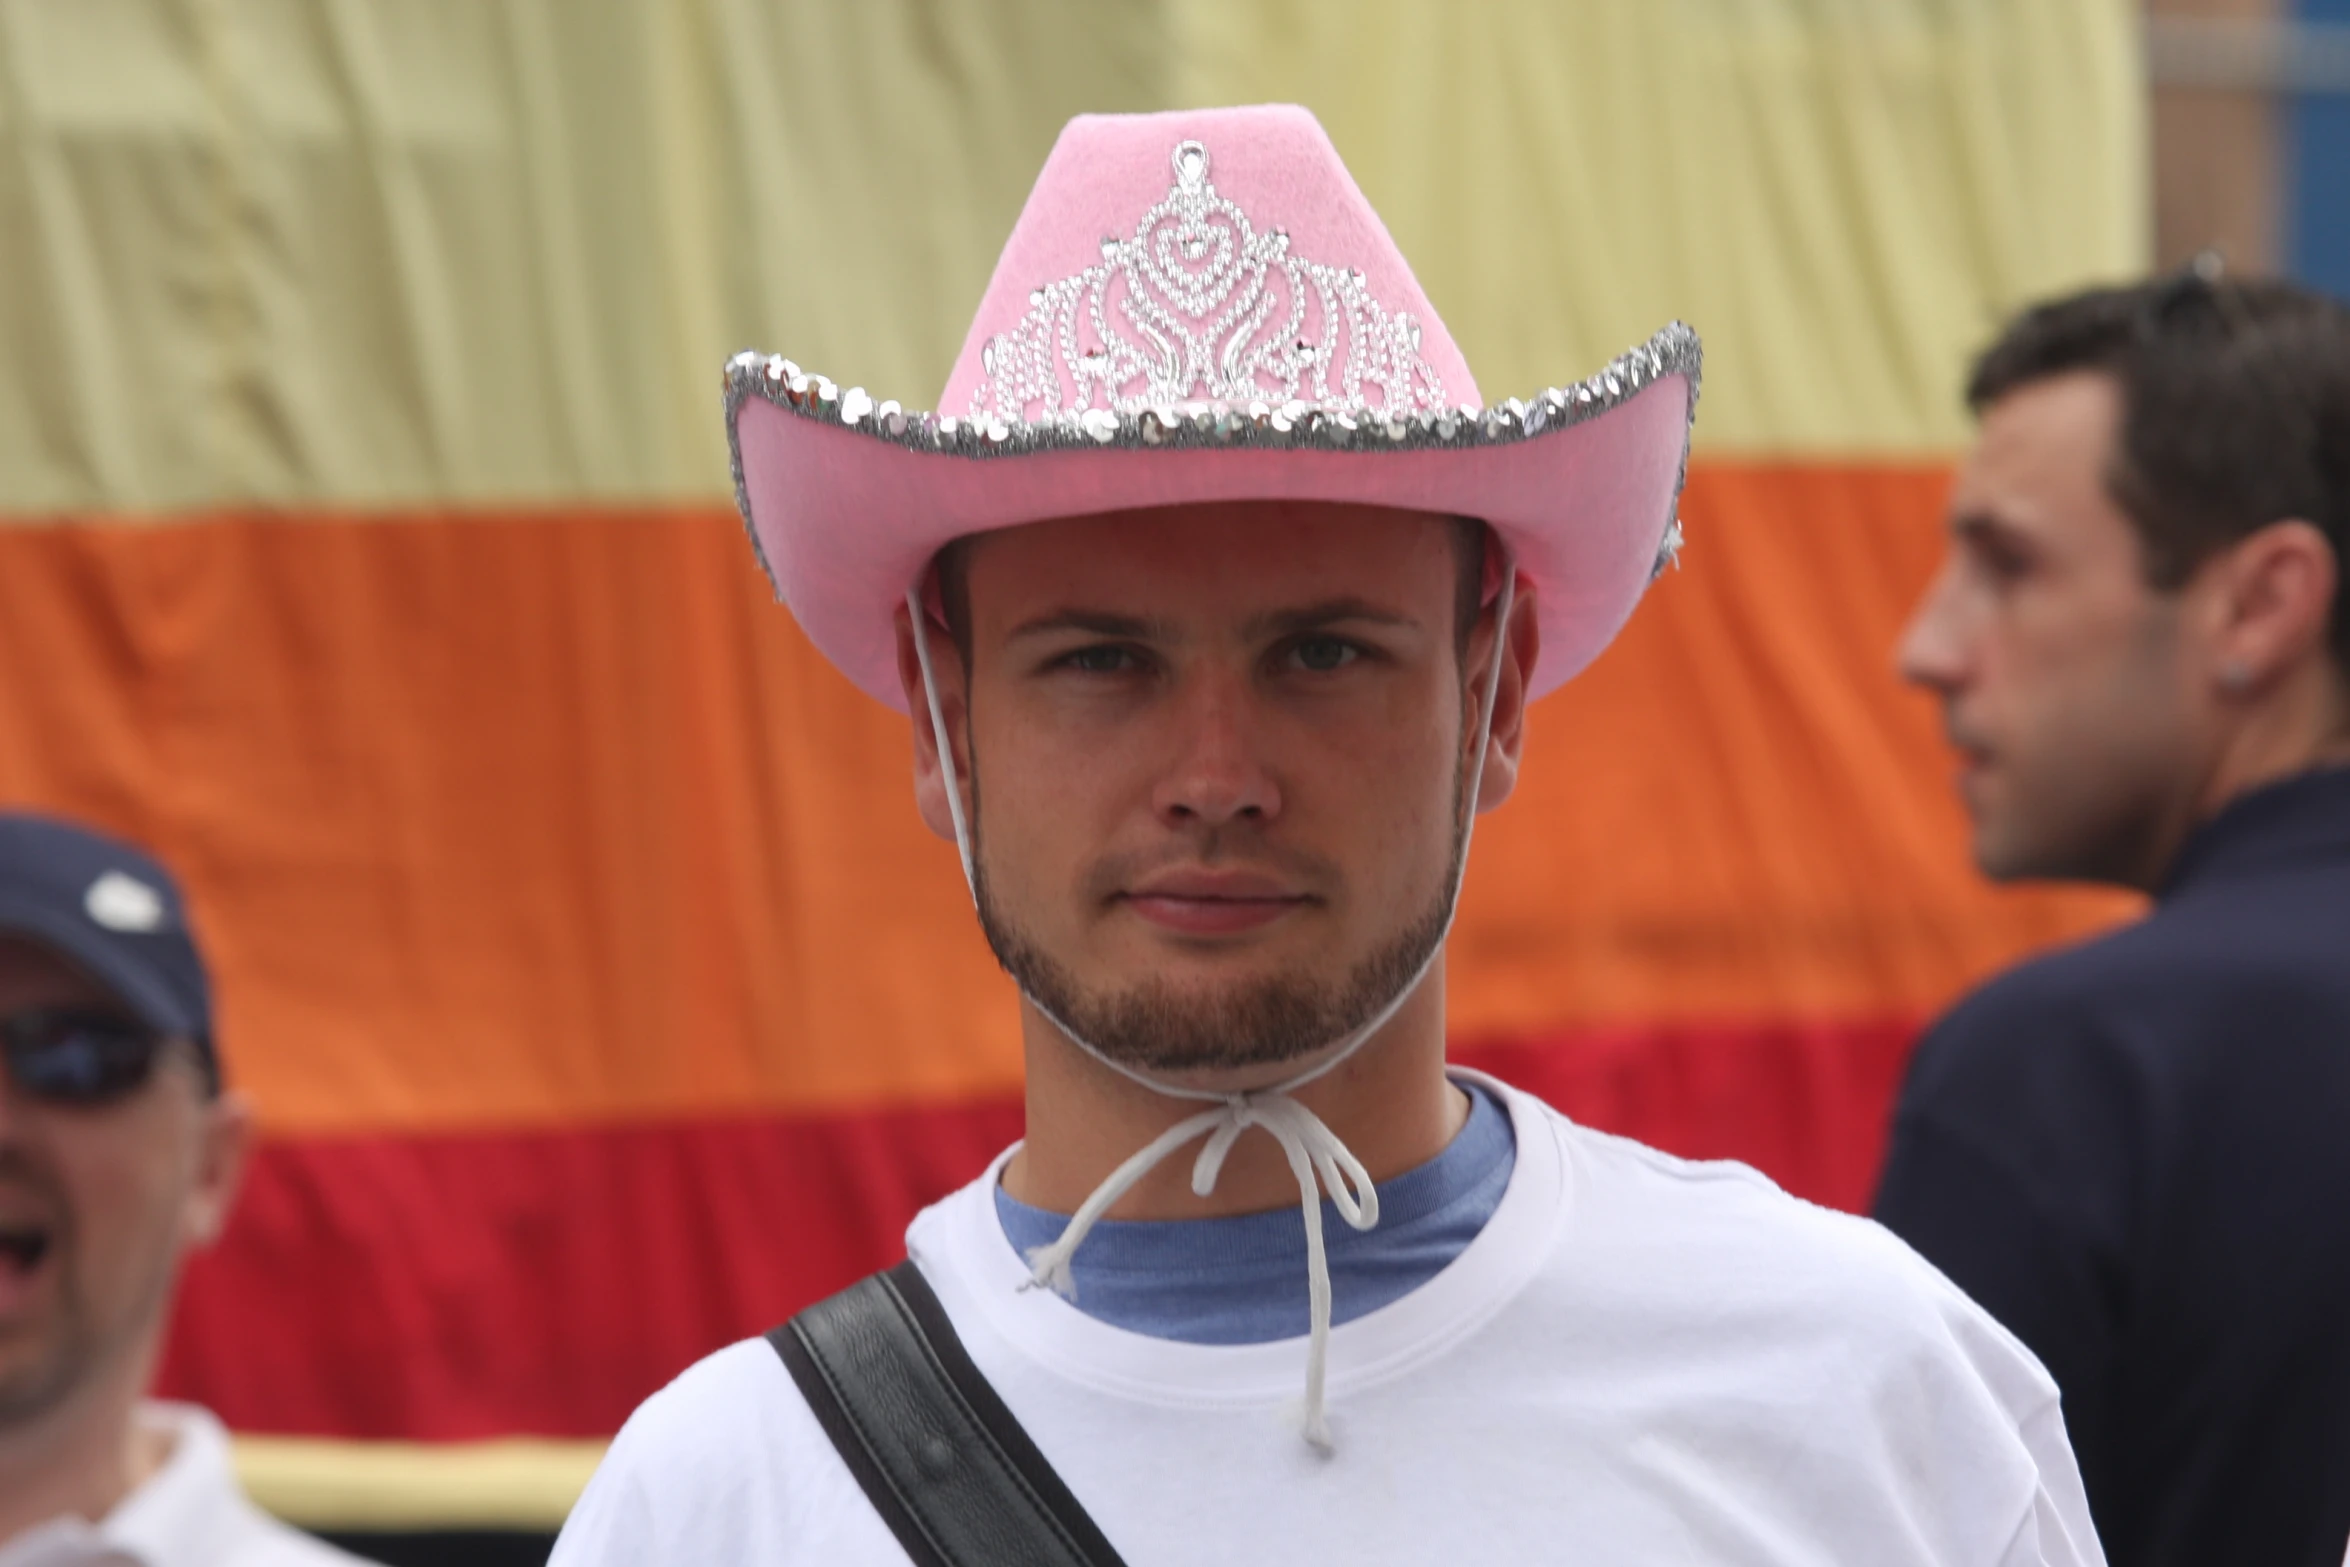 a man wearing a pink hat with silver trim